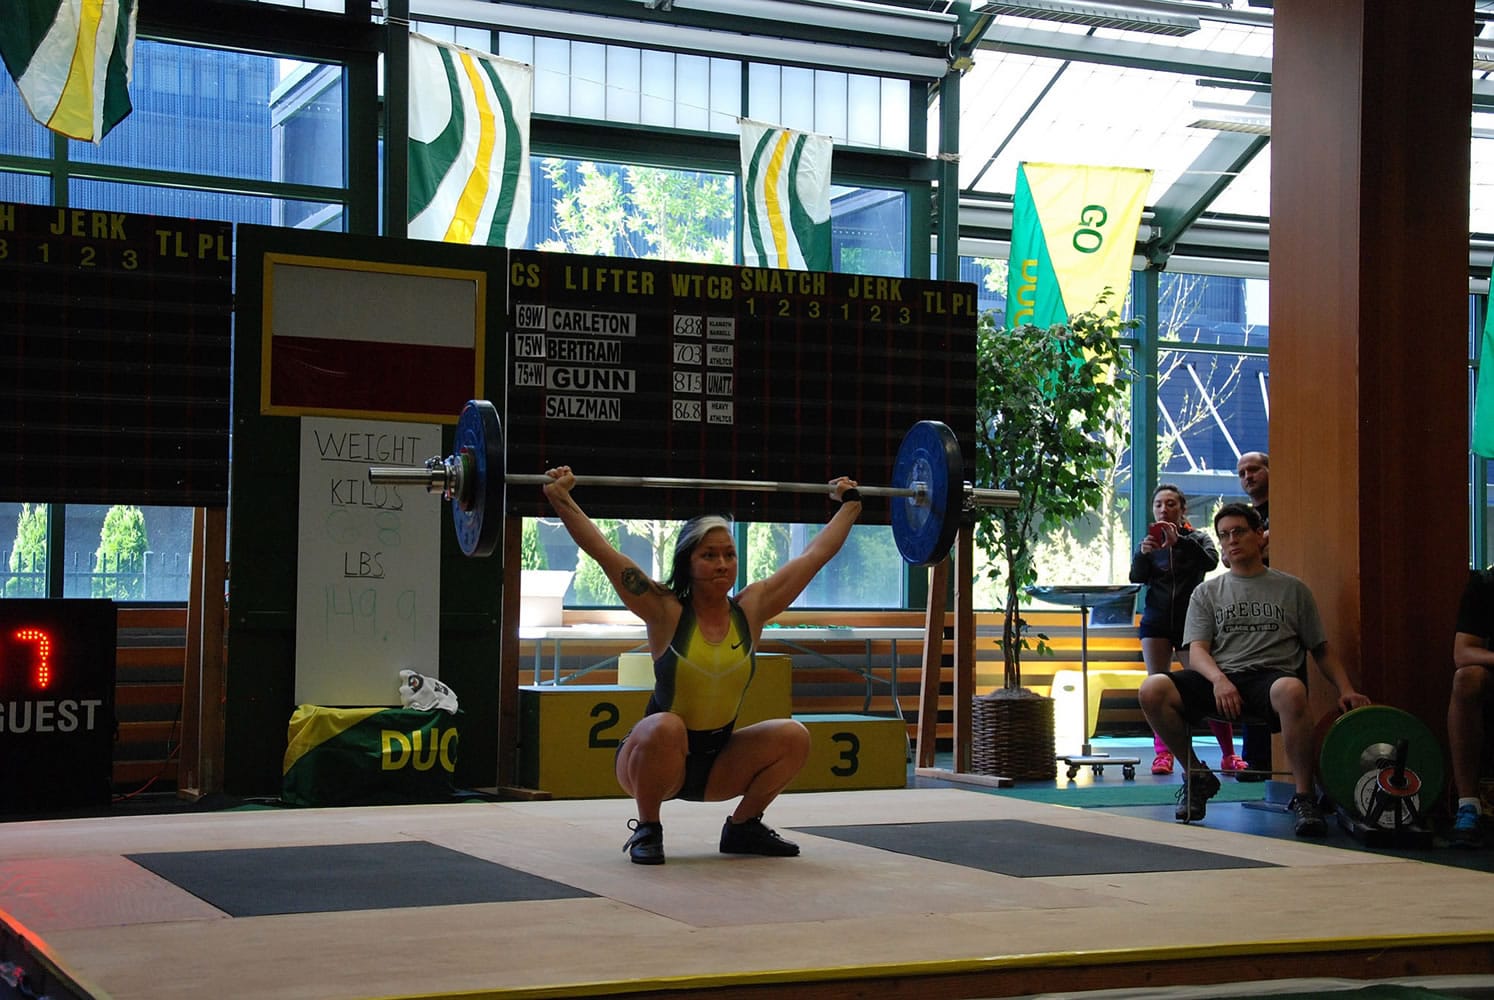 Aubry Jones of Vancouver will compete at the USA Weightlifting National Championships in Salt Lake City later this week.